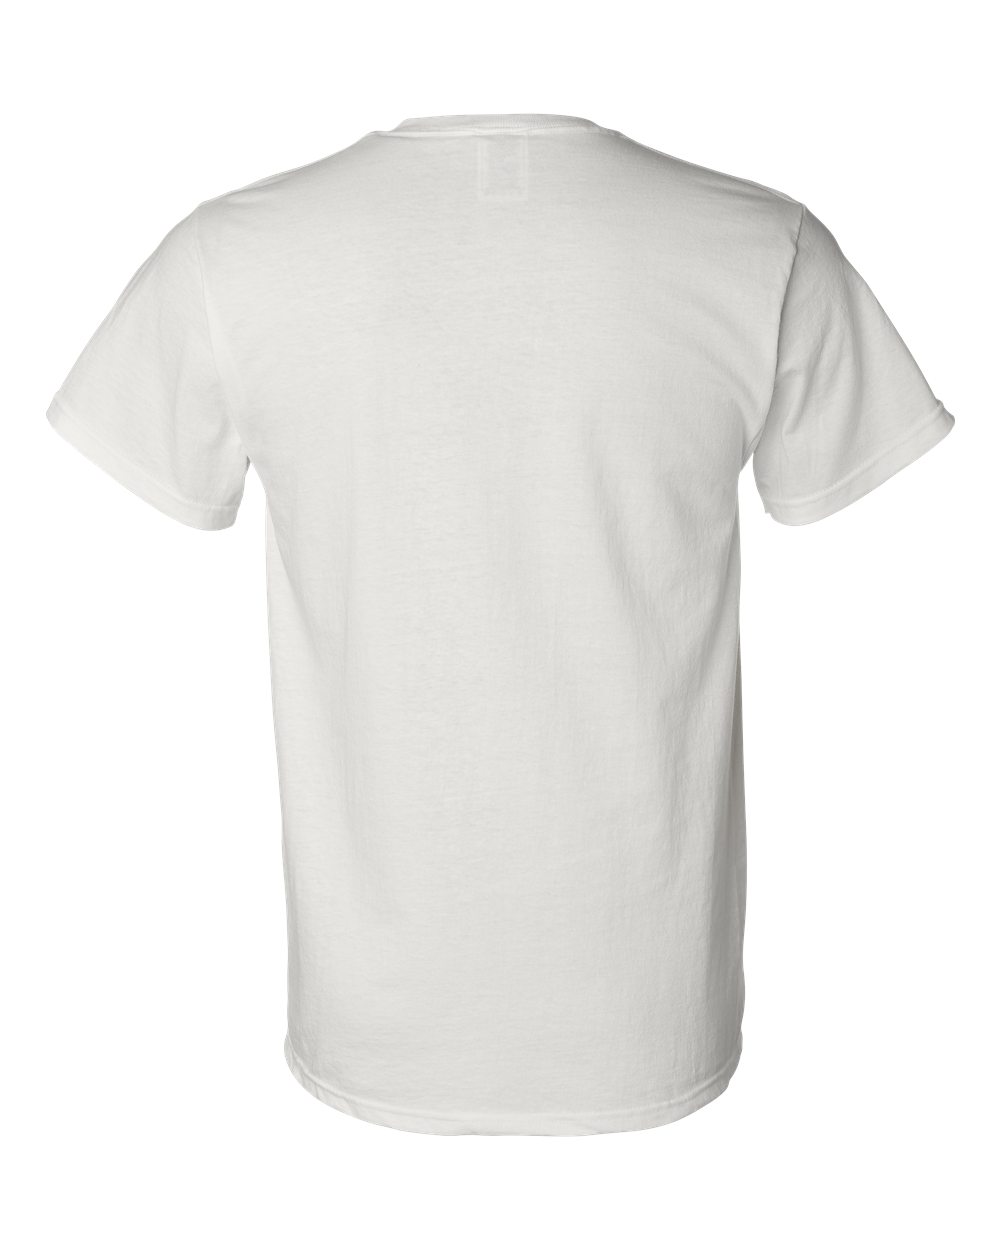 HD Cotton T-Shirt a Pocket Fruit of the | Clothing Shop Online